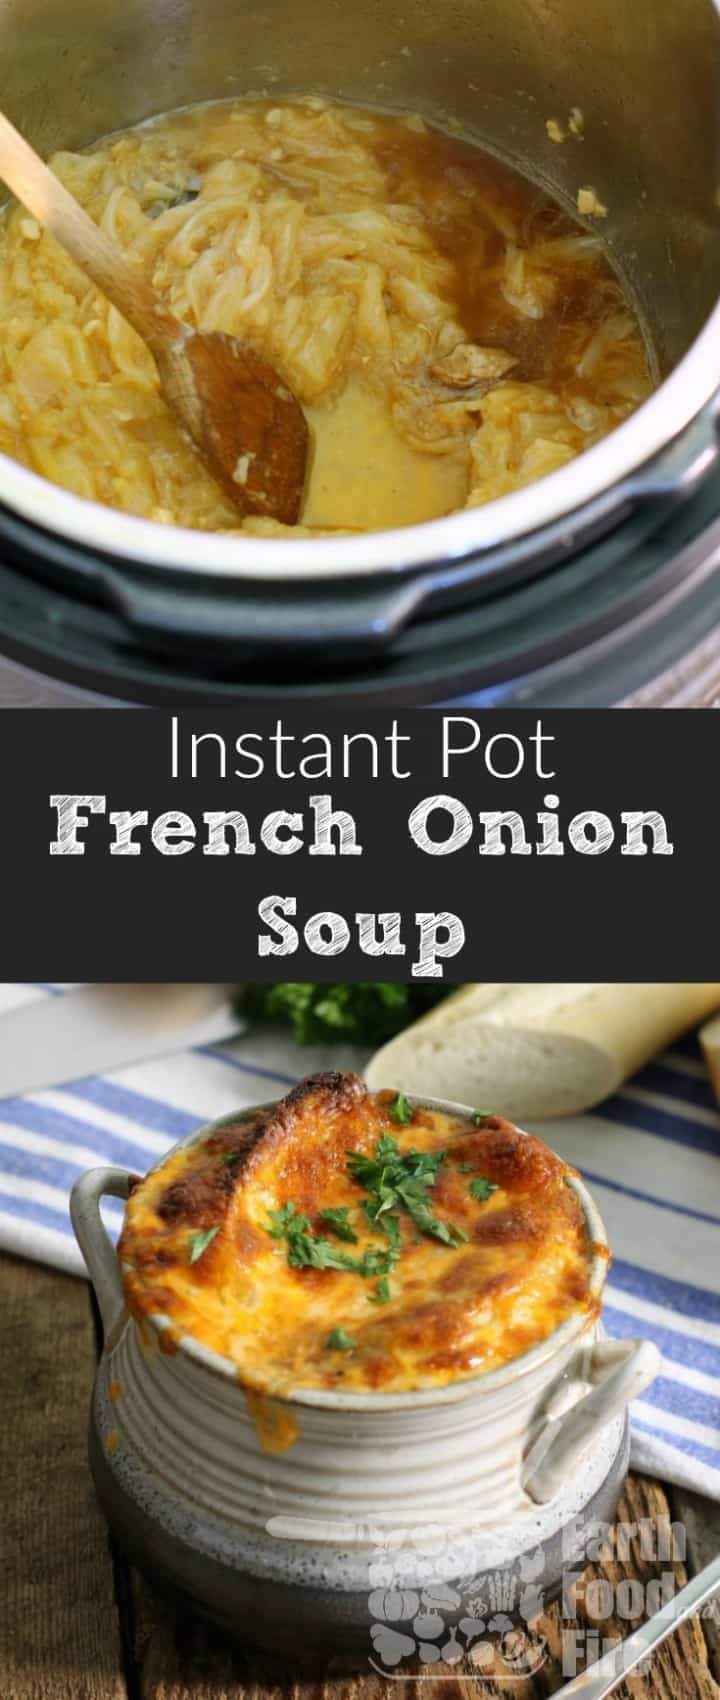 A classic soup full of sweet caramelized onions, rich beef broth, and topped with cheesy goodness, making restaurant quality French onion soup couldn't be easier then this! #glutenfree #frenchonionsoup #instantpot #onion #soup #appetizer #entree